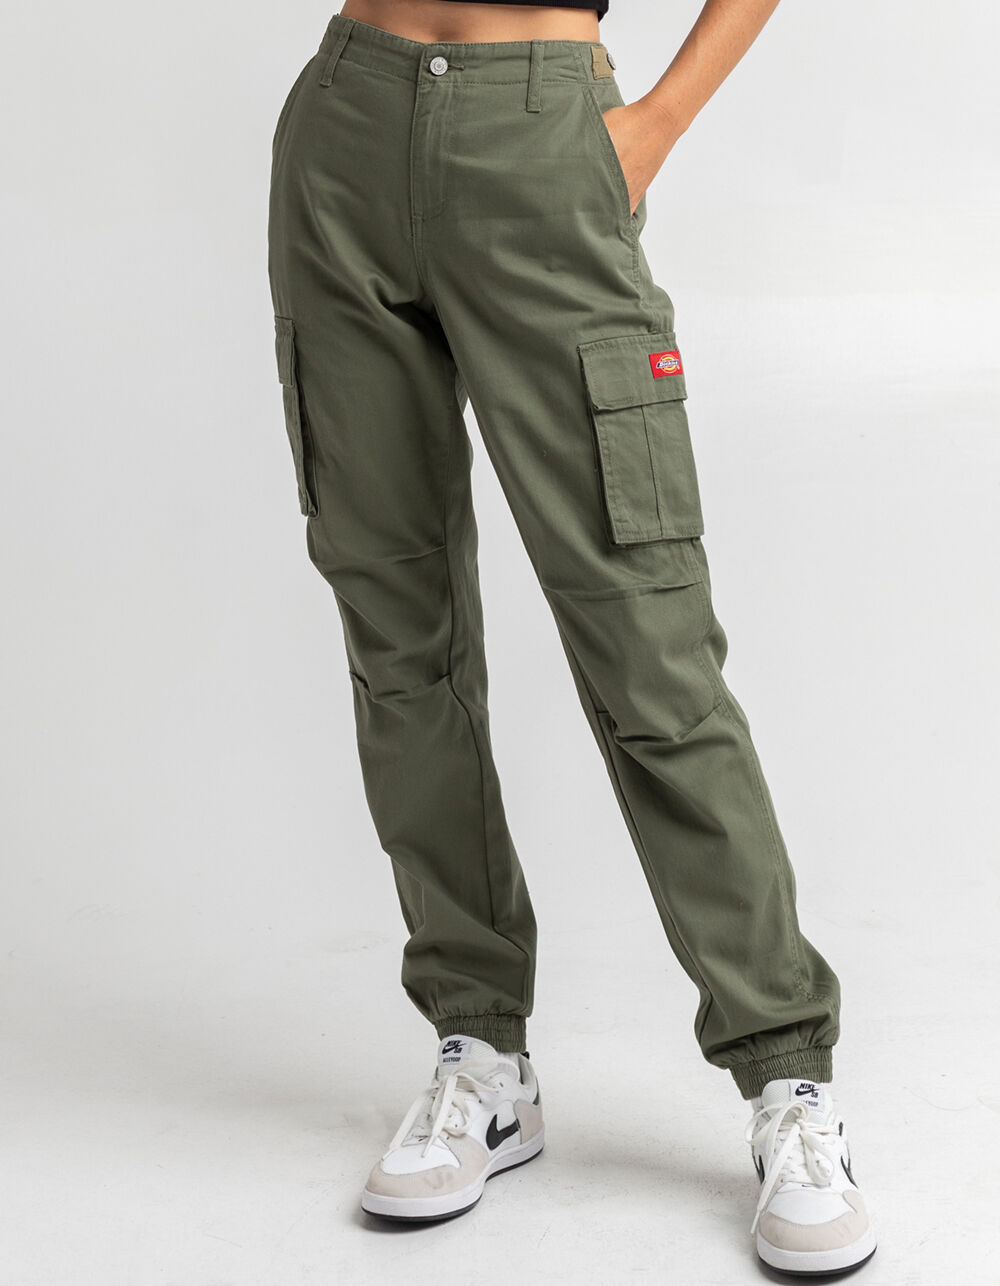 Joggers  DICKIES Womens Tobacco Utility Jogger Pants Rust/Copper